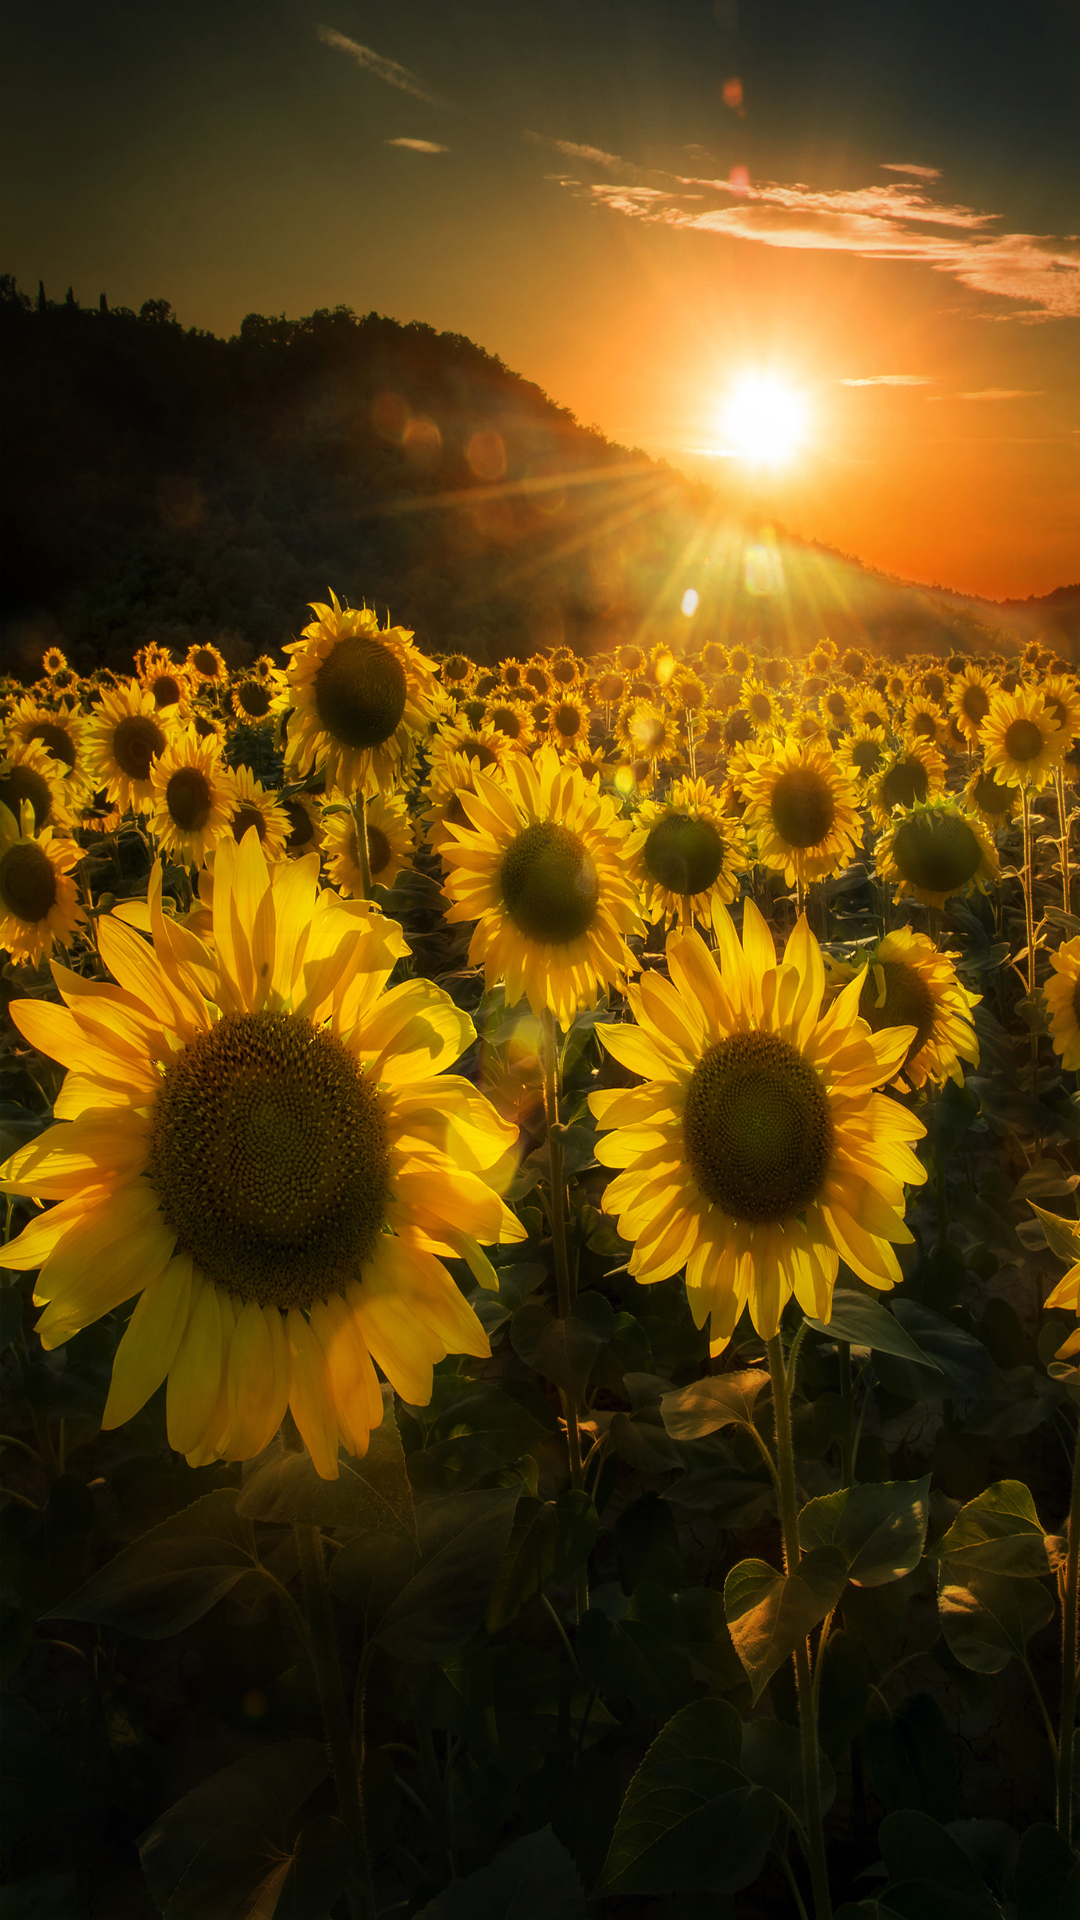 Sunflowers at sunset iPhone Wallpaper